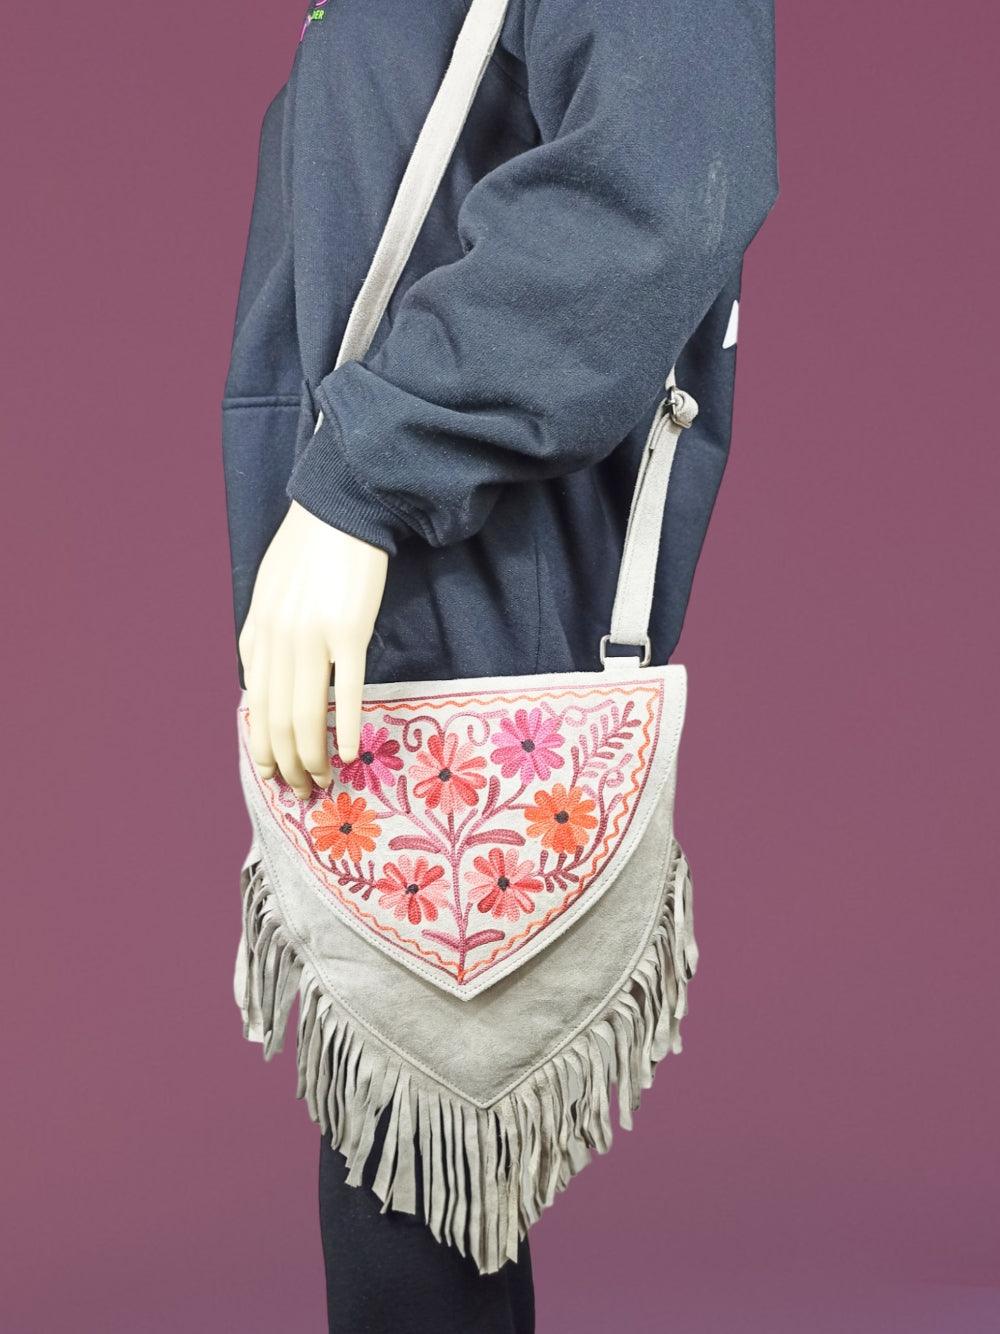 Suede Leather Heart Bag | Embroidery Heart Bag |  Sling Bag For Girls